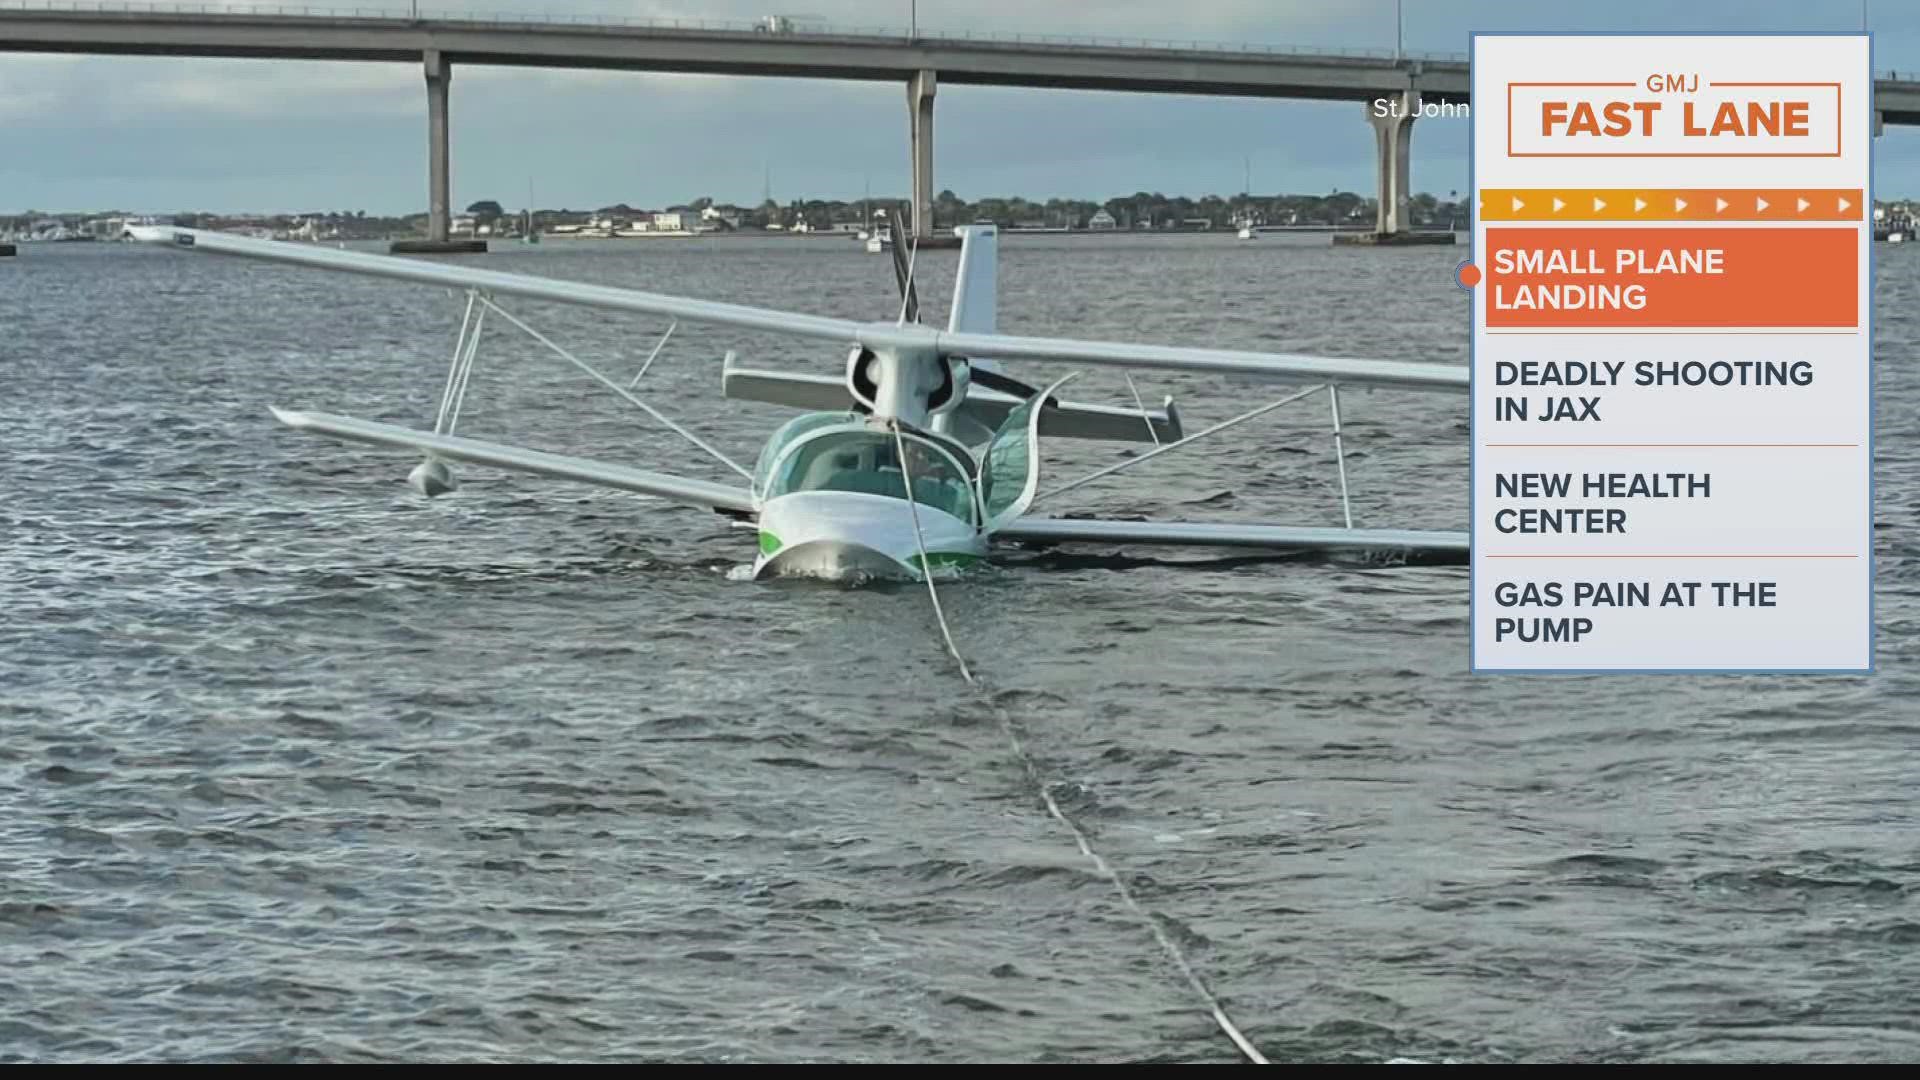 A good Samaritan towed the plane, helping to keep it afloat.